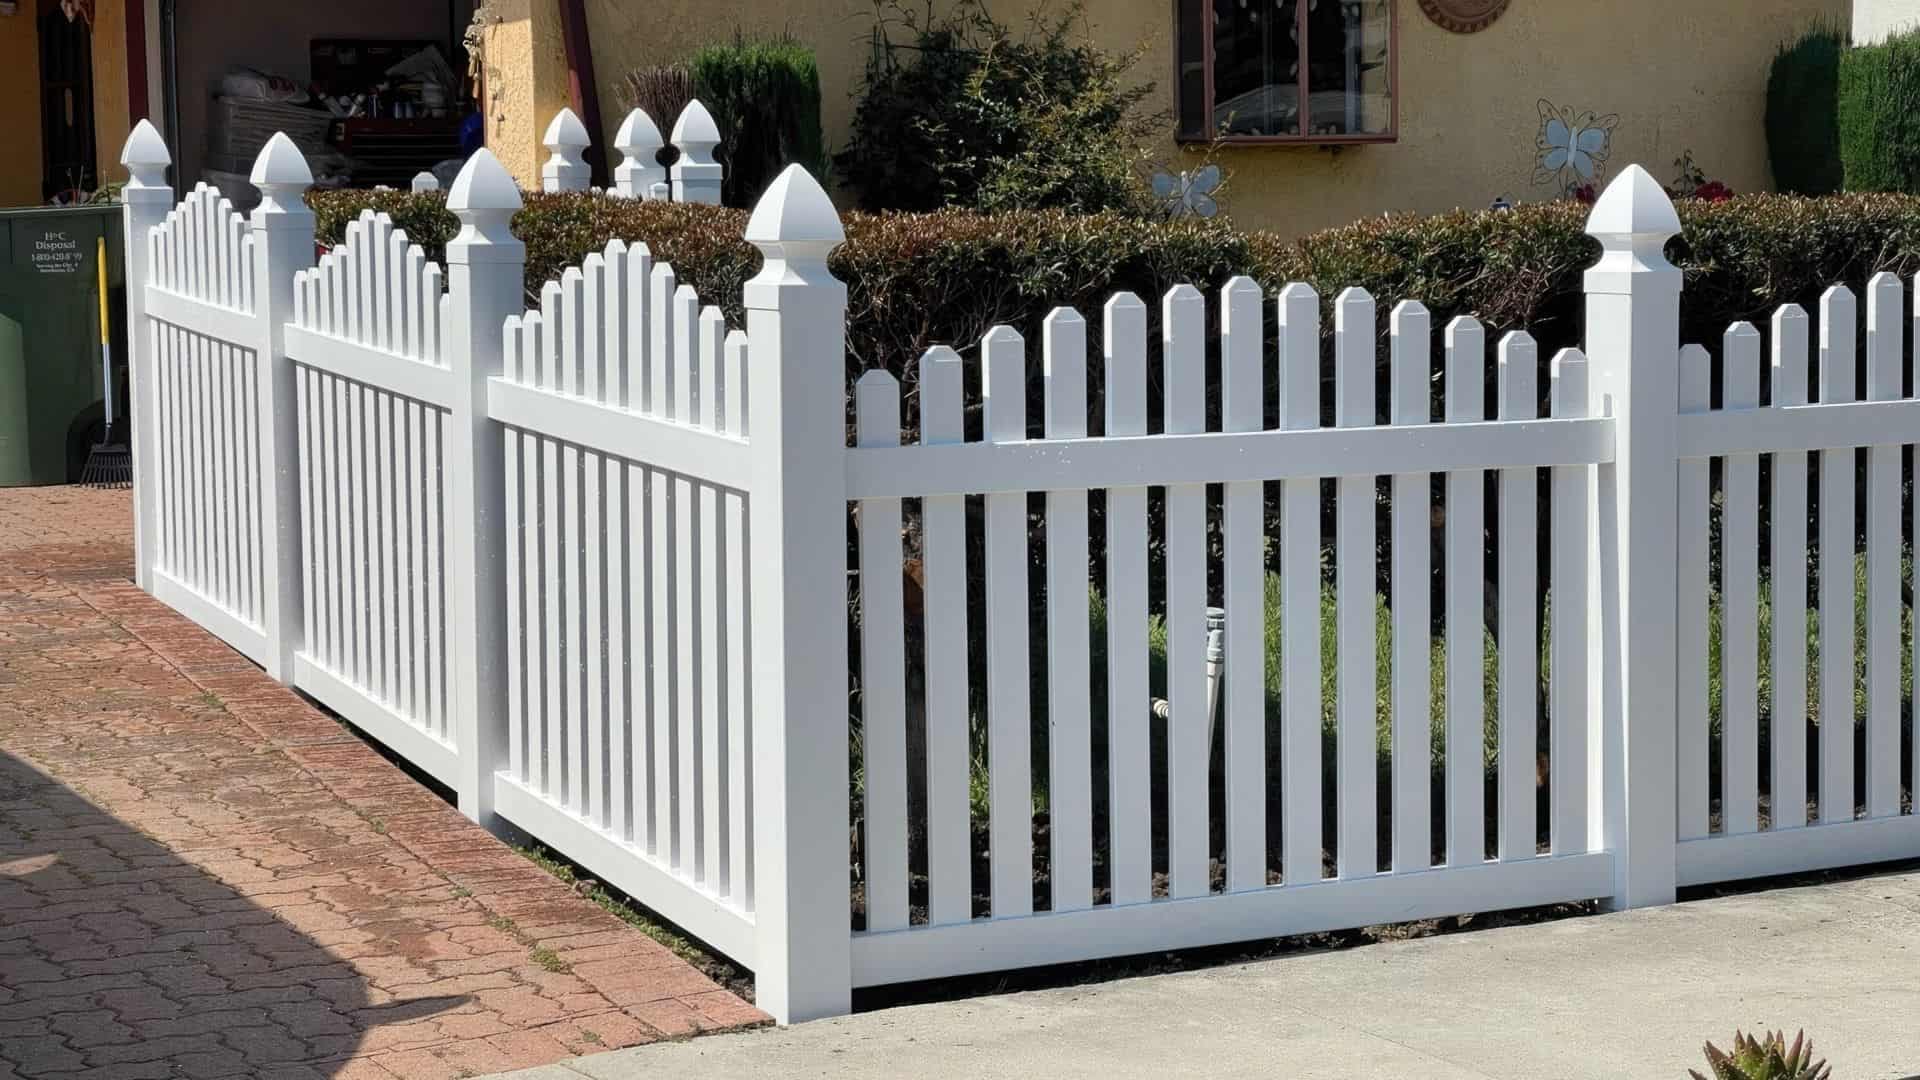 Vinyl arched picket fence beside concrete sidewalk, brick driveway & charming houses in the background.